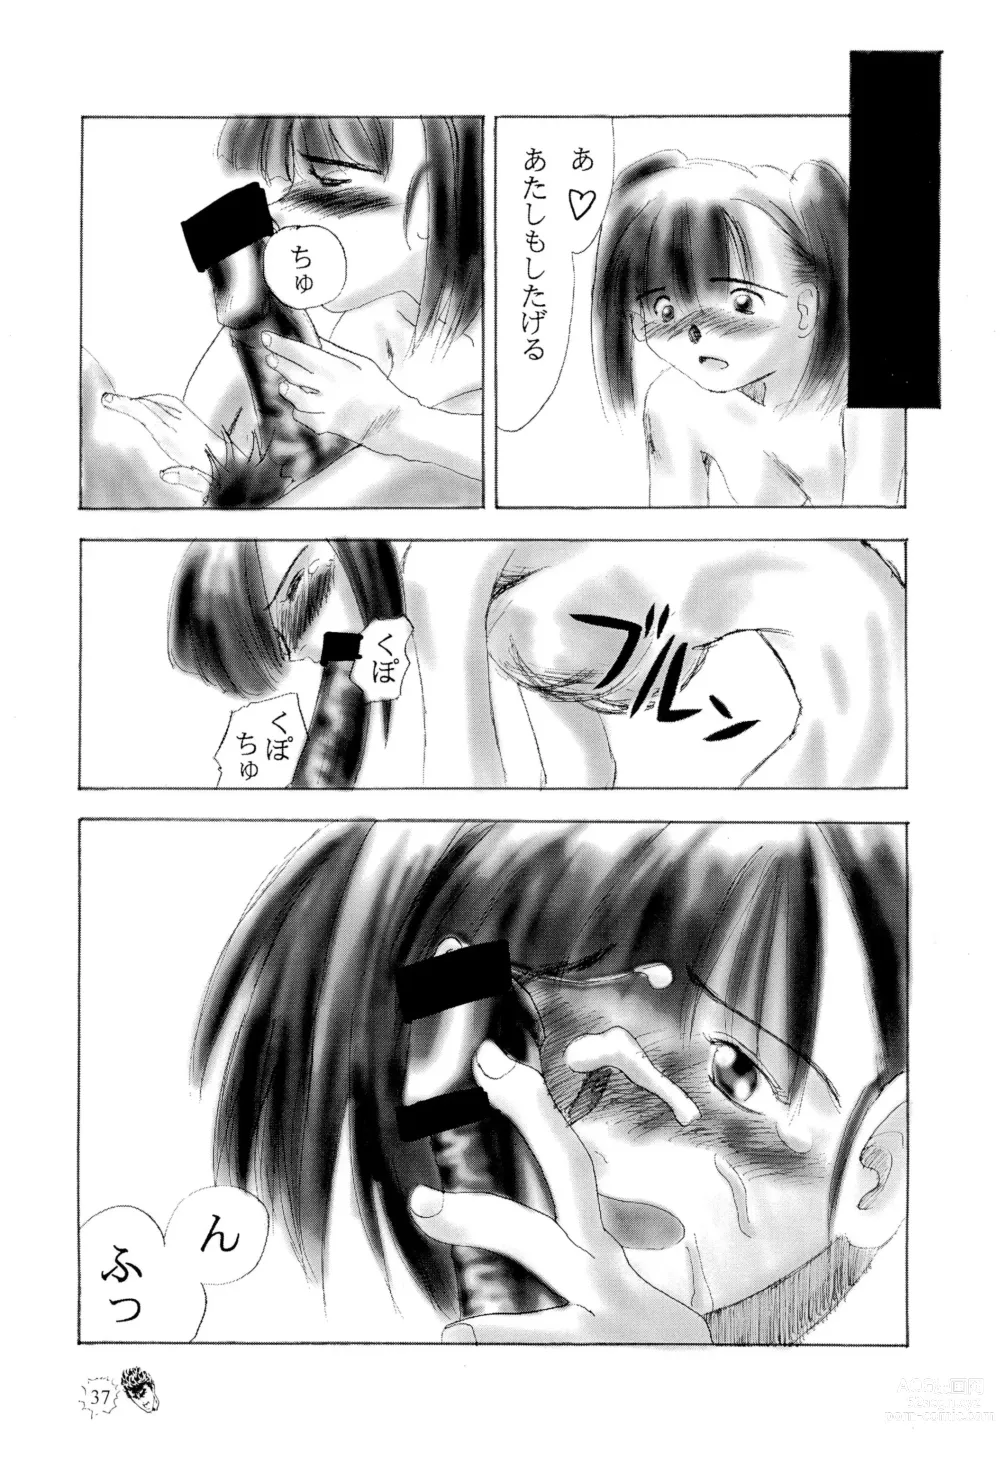 Page 37 of doujinshi CHIBICKERS 4